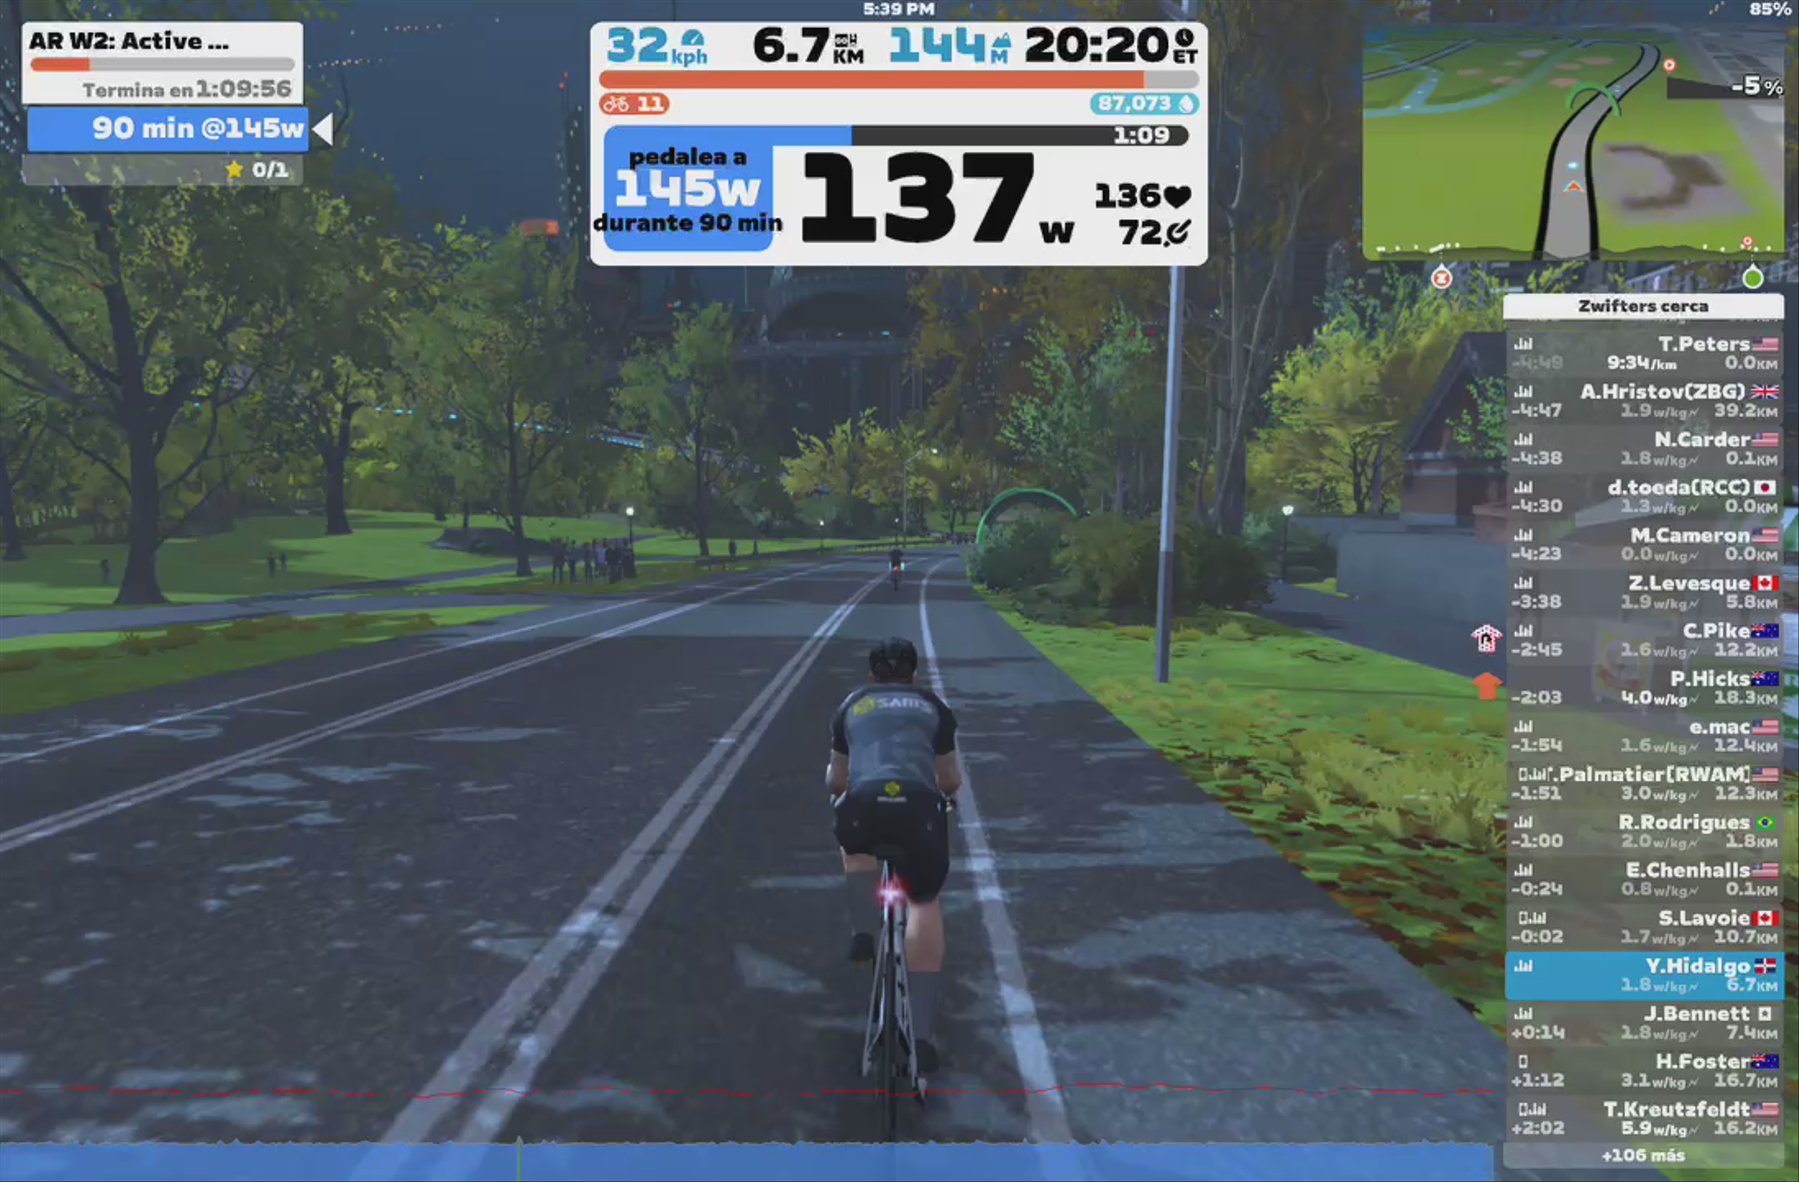 Zwift - AR W2: Active Recovery 90min in New York